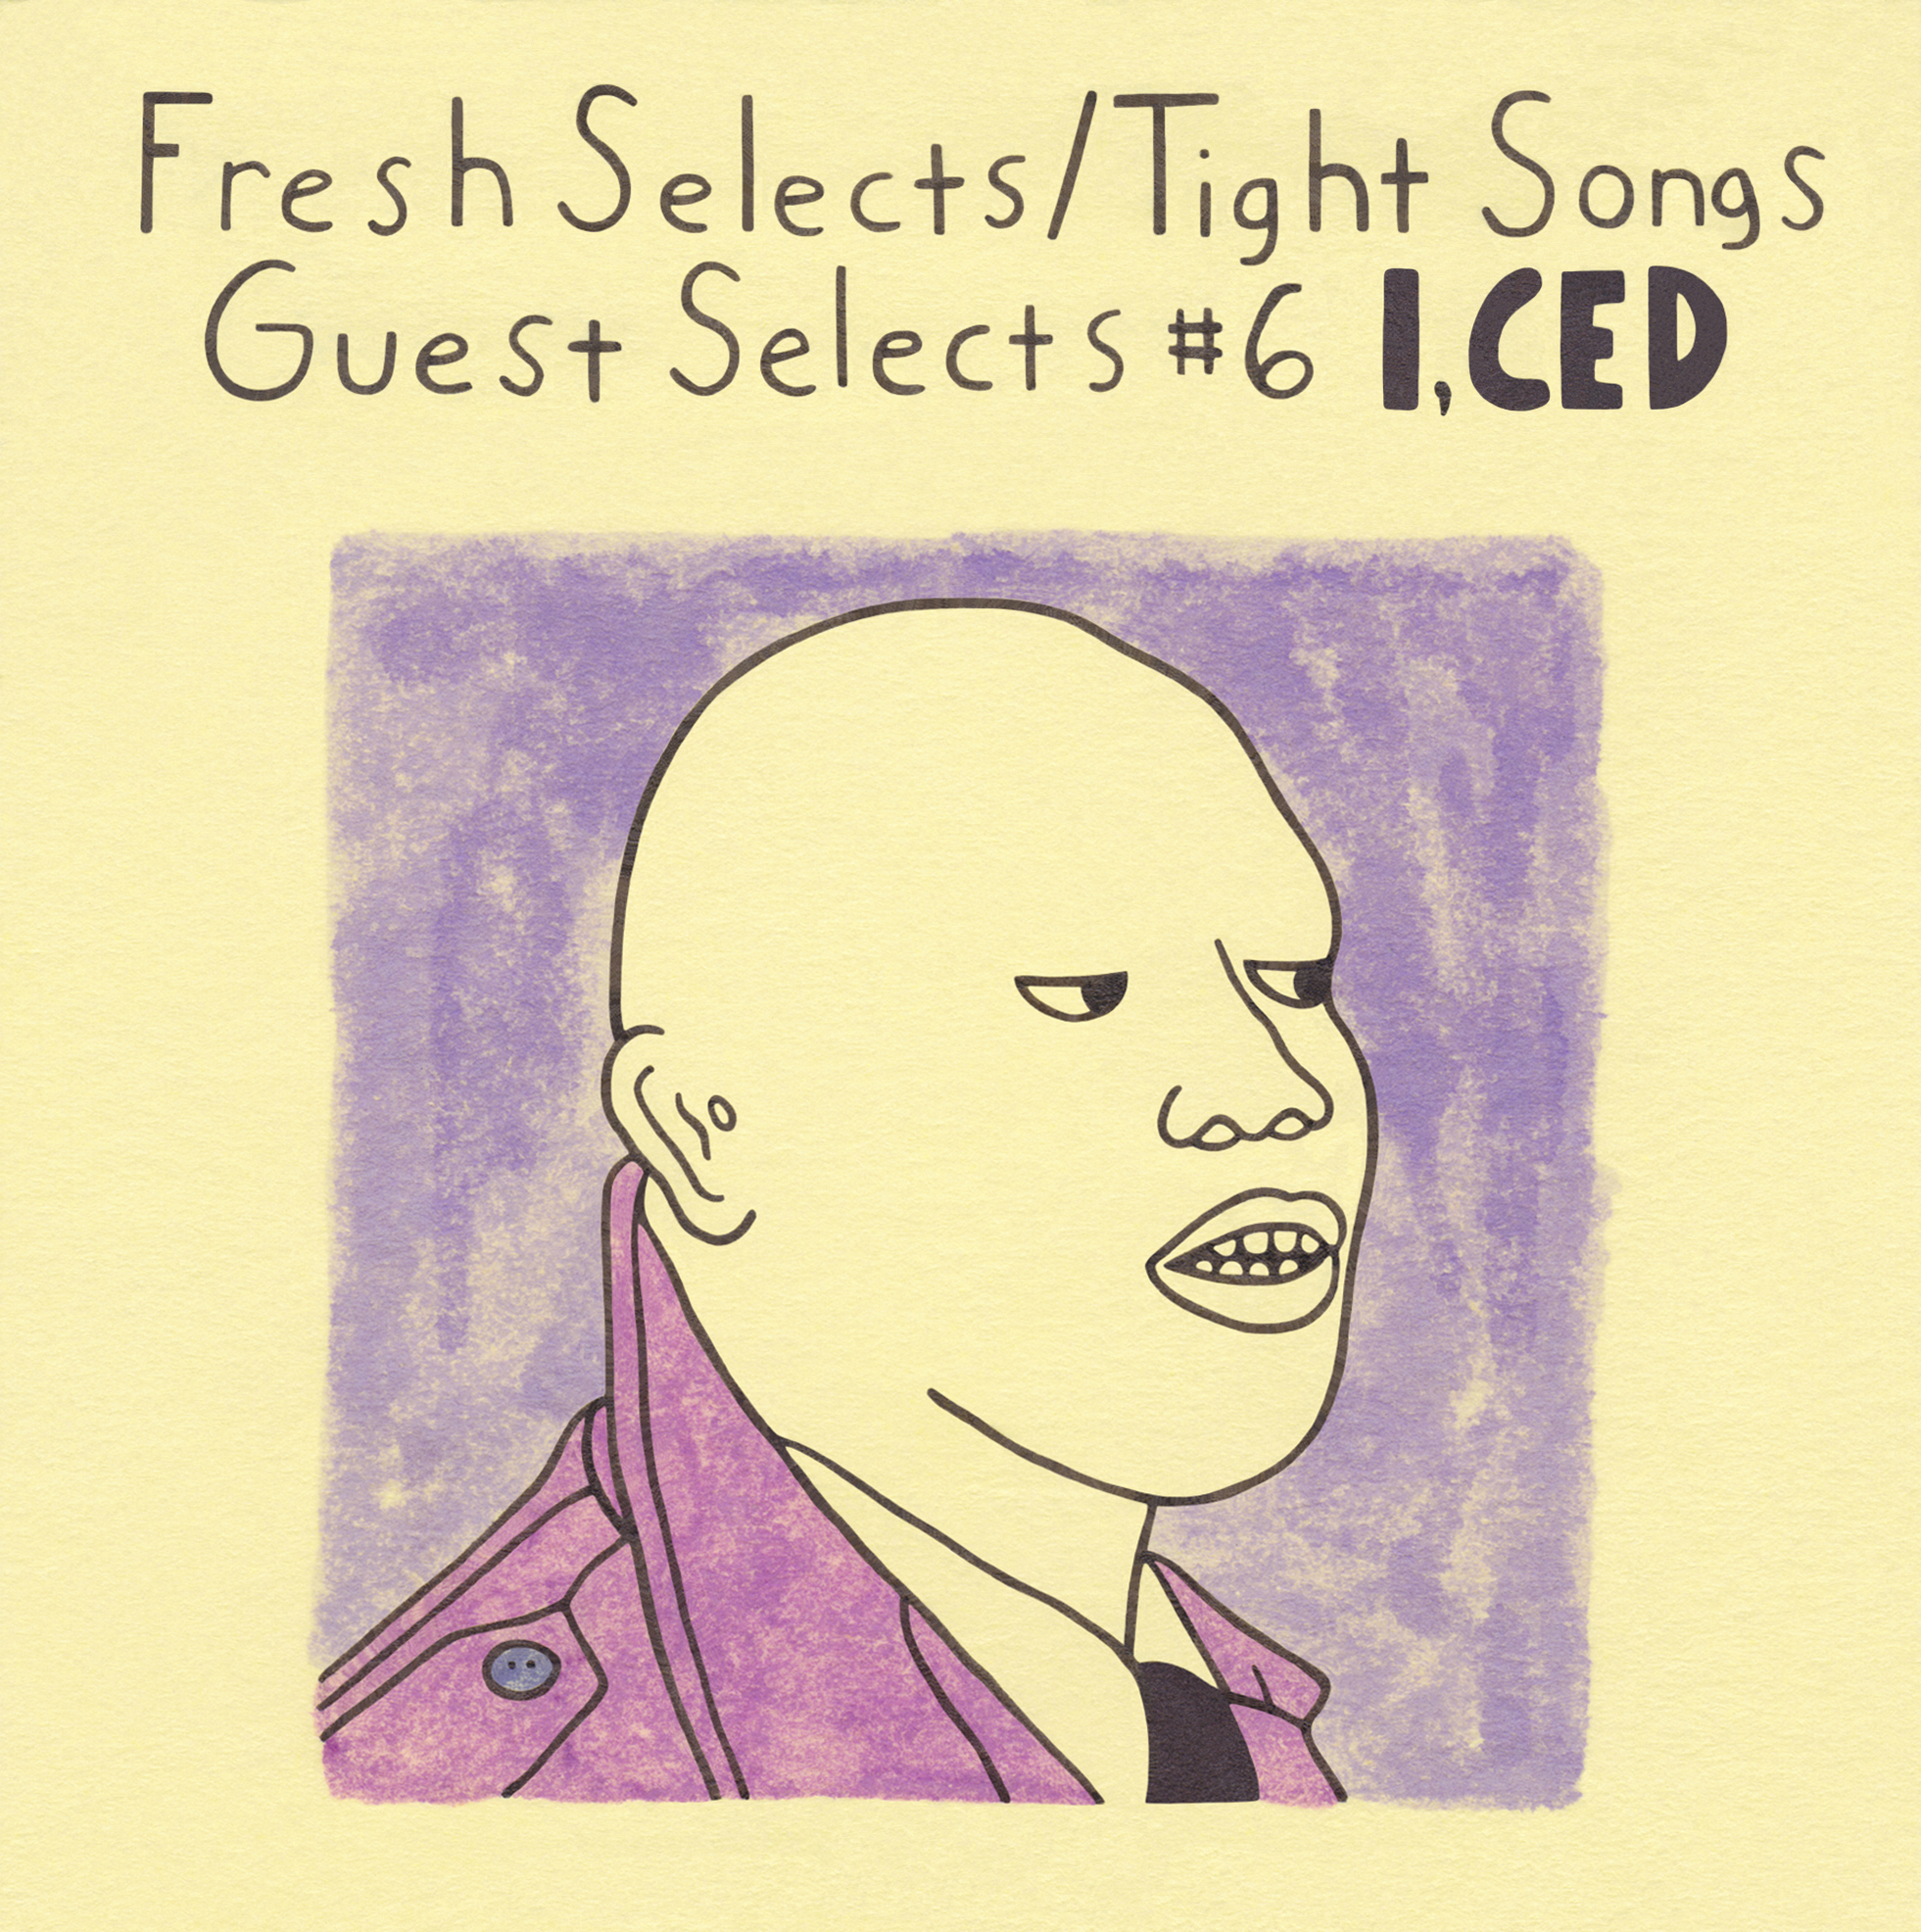 Fresh Selects / Tight Songs – Guest Selects #6: I, CED